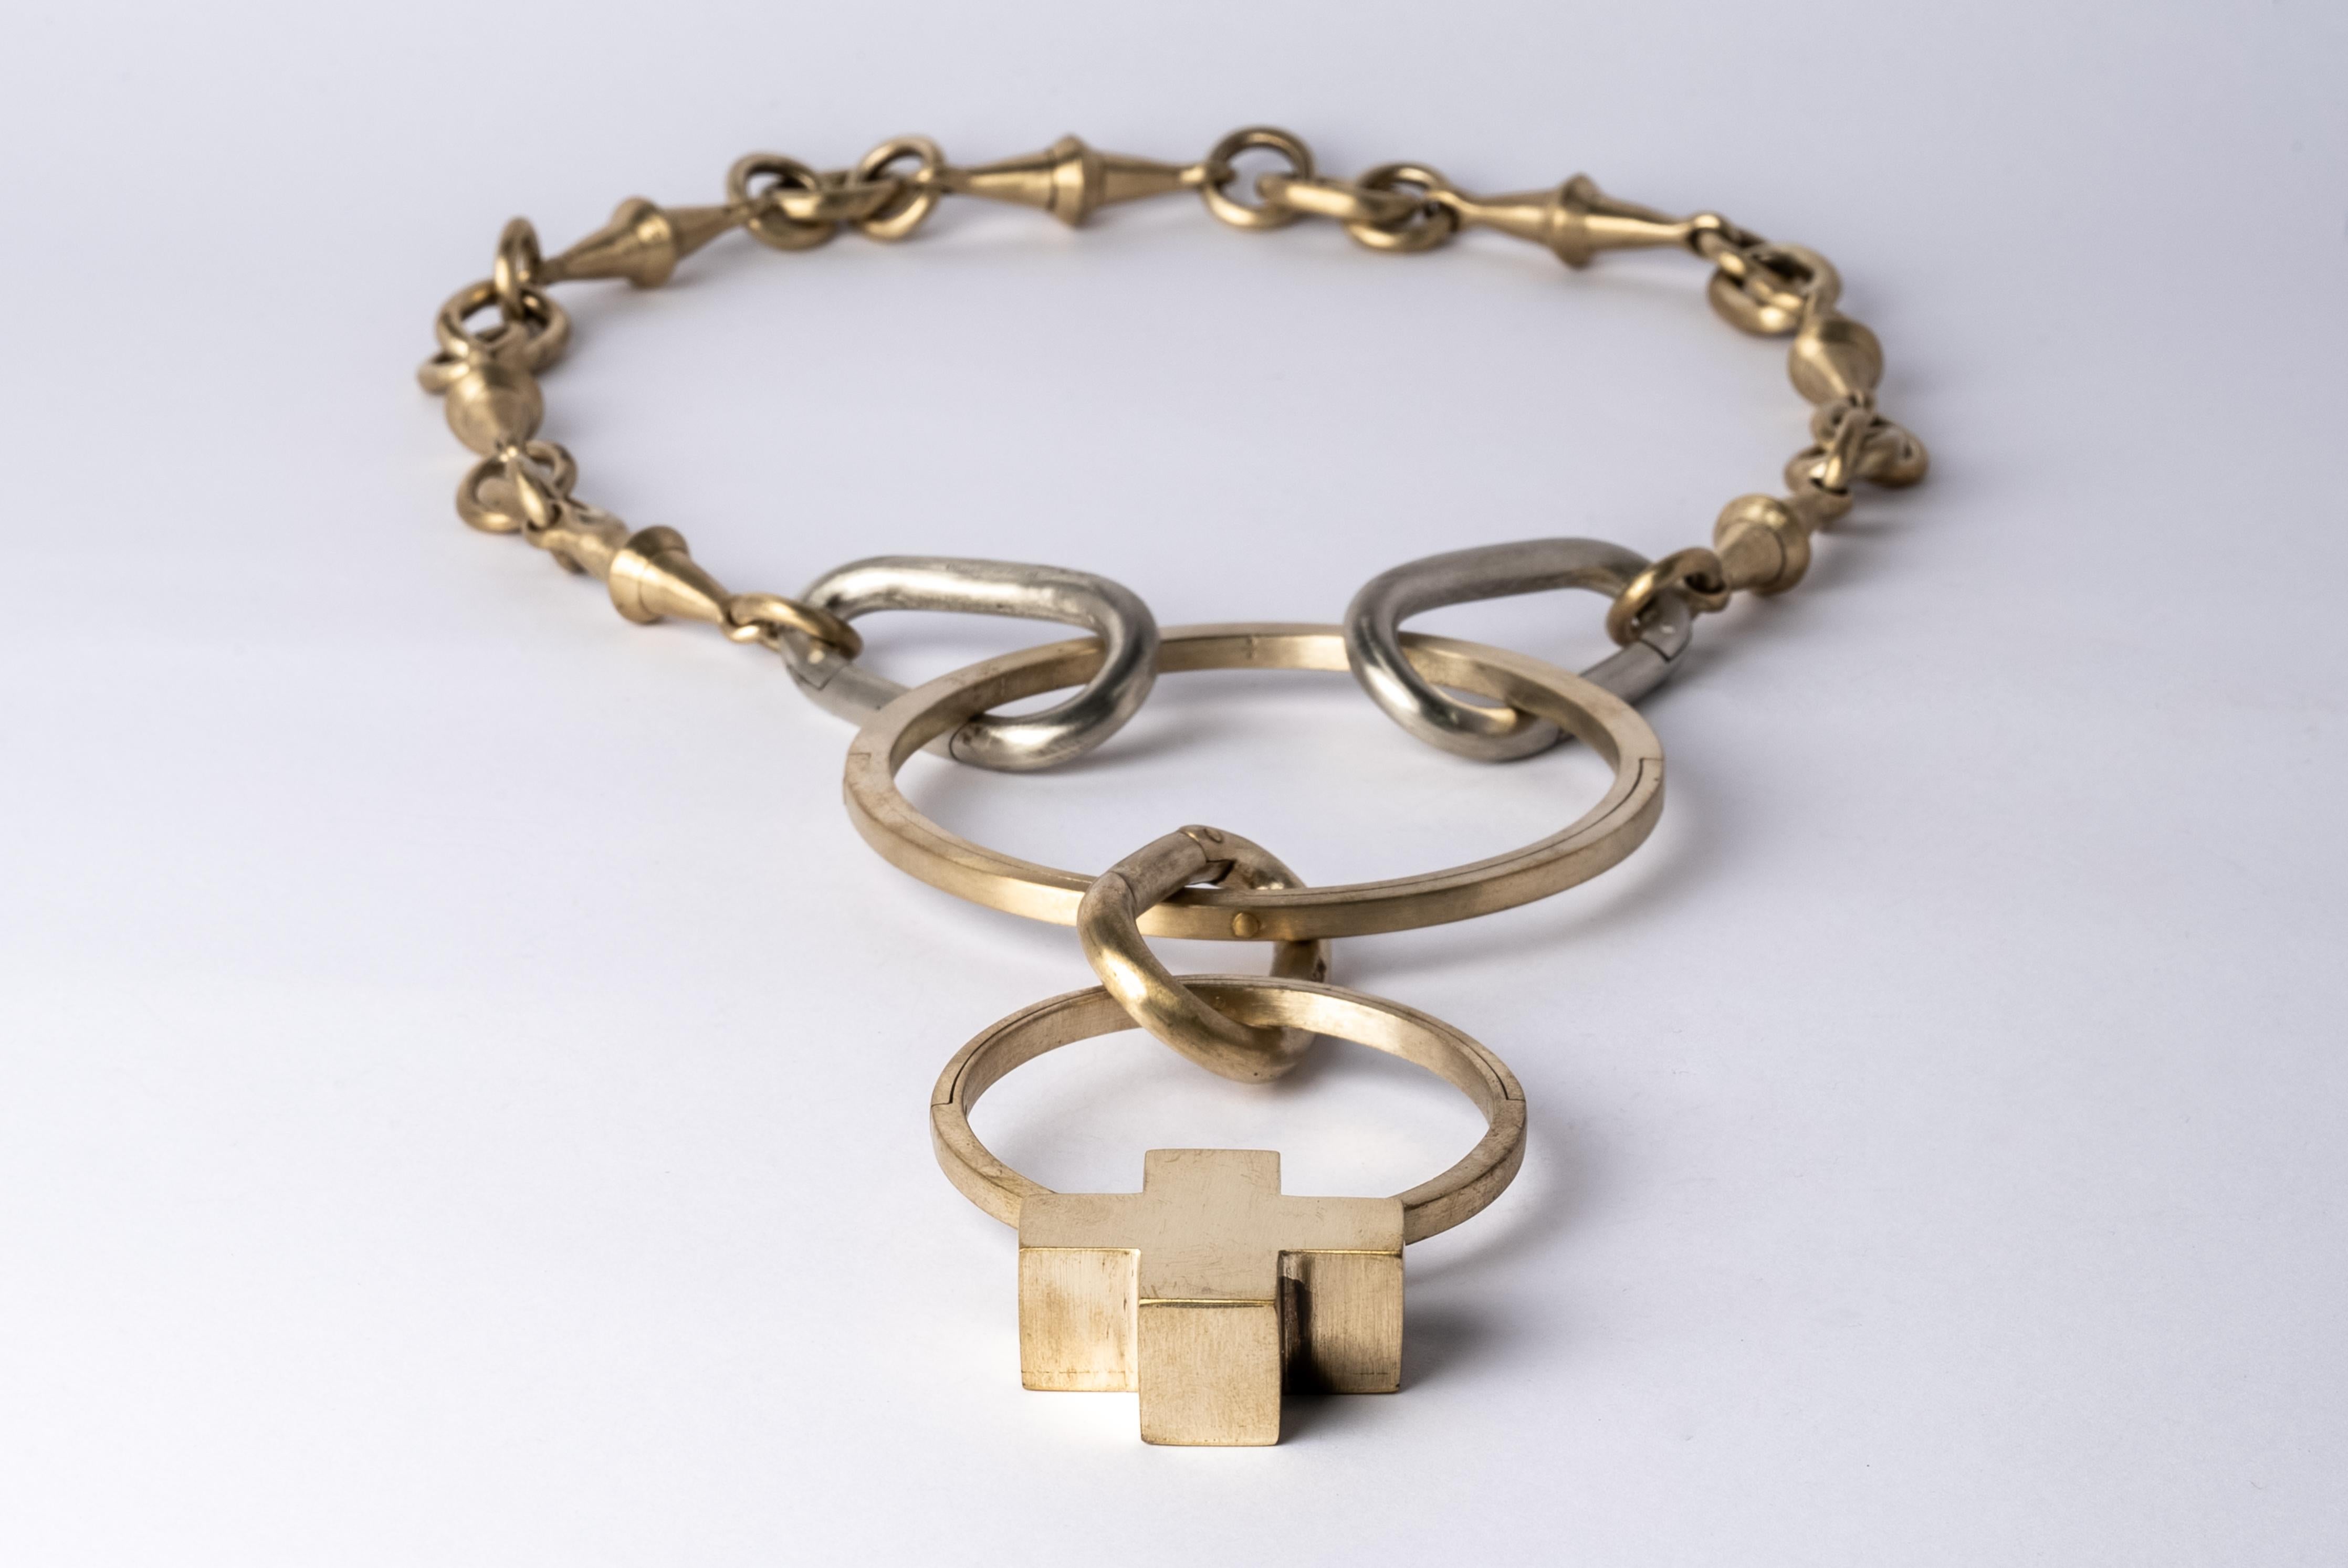 Totemic chain necklace made from combination of brass and bronze.
The Charm System is an interrelated group of products that can be mixed and matched or worn individually.
Chain length (closure to closure): 715 mm
Mini plus on portal length: 79 mm